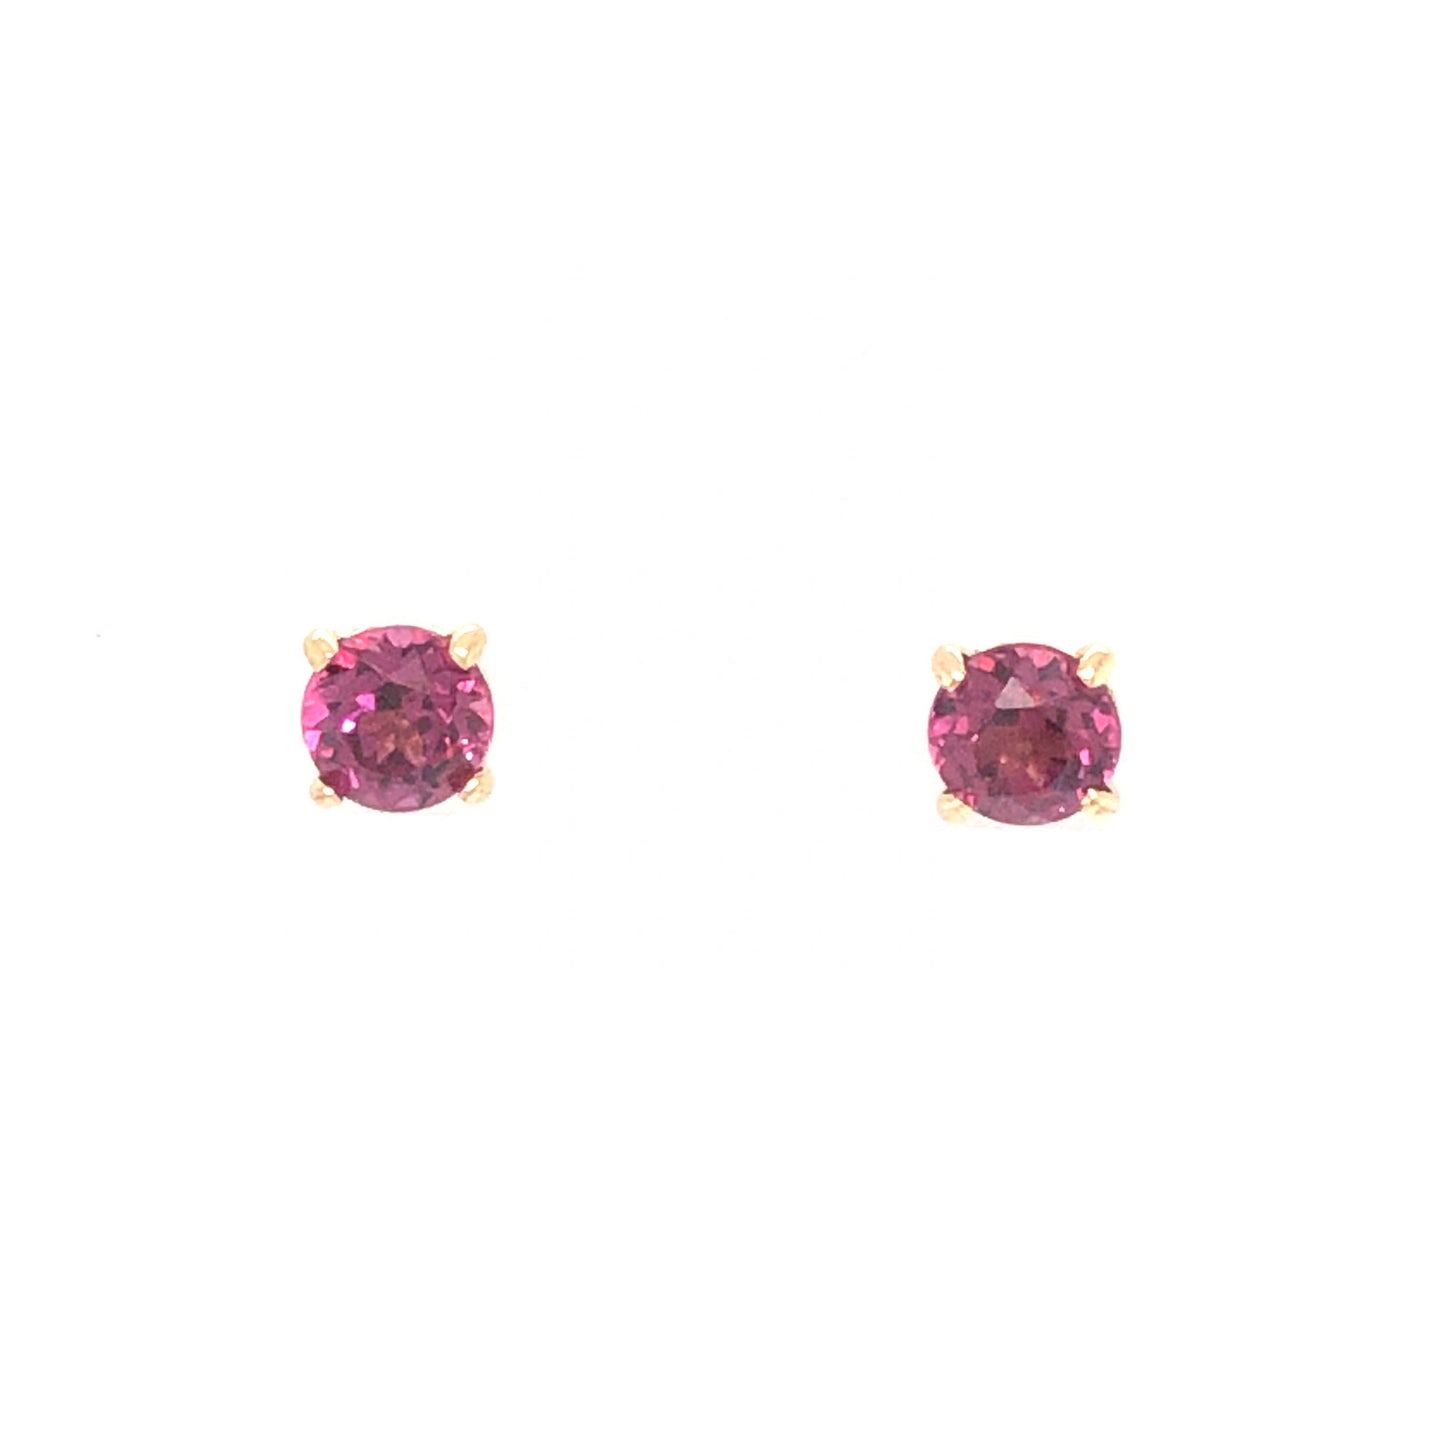 Round Pink Tourmaline Earrings in 14k Yellow Gold